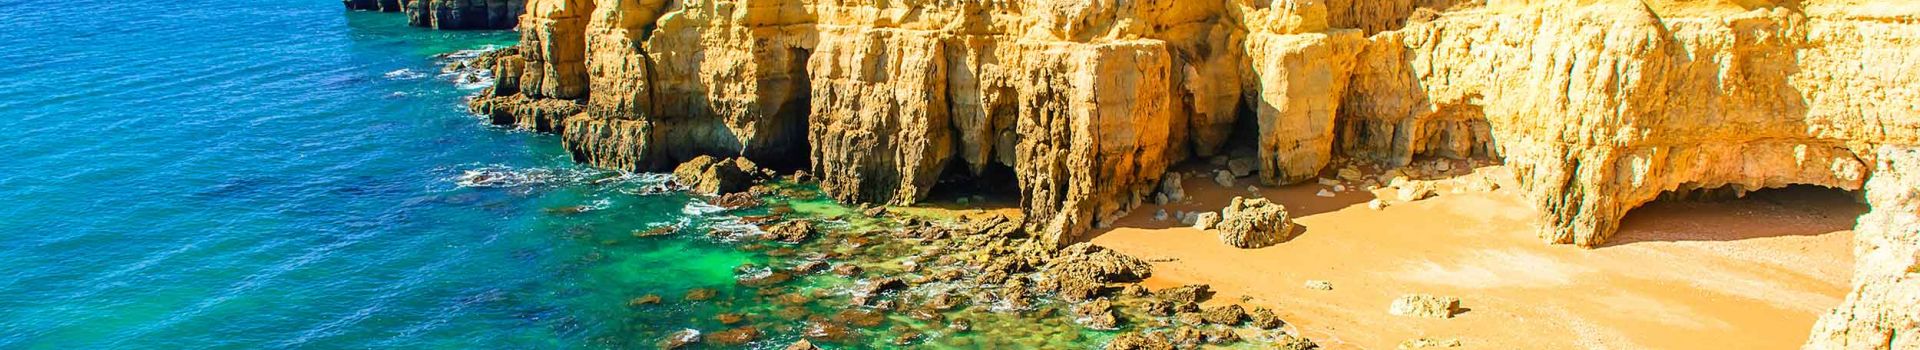 Cheap holidays from Knock to the Algarve with Cassidy Travel